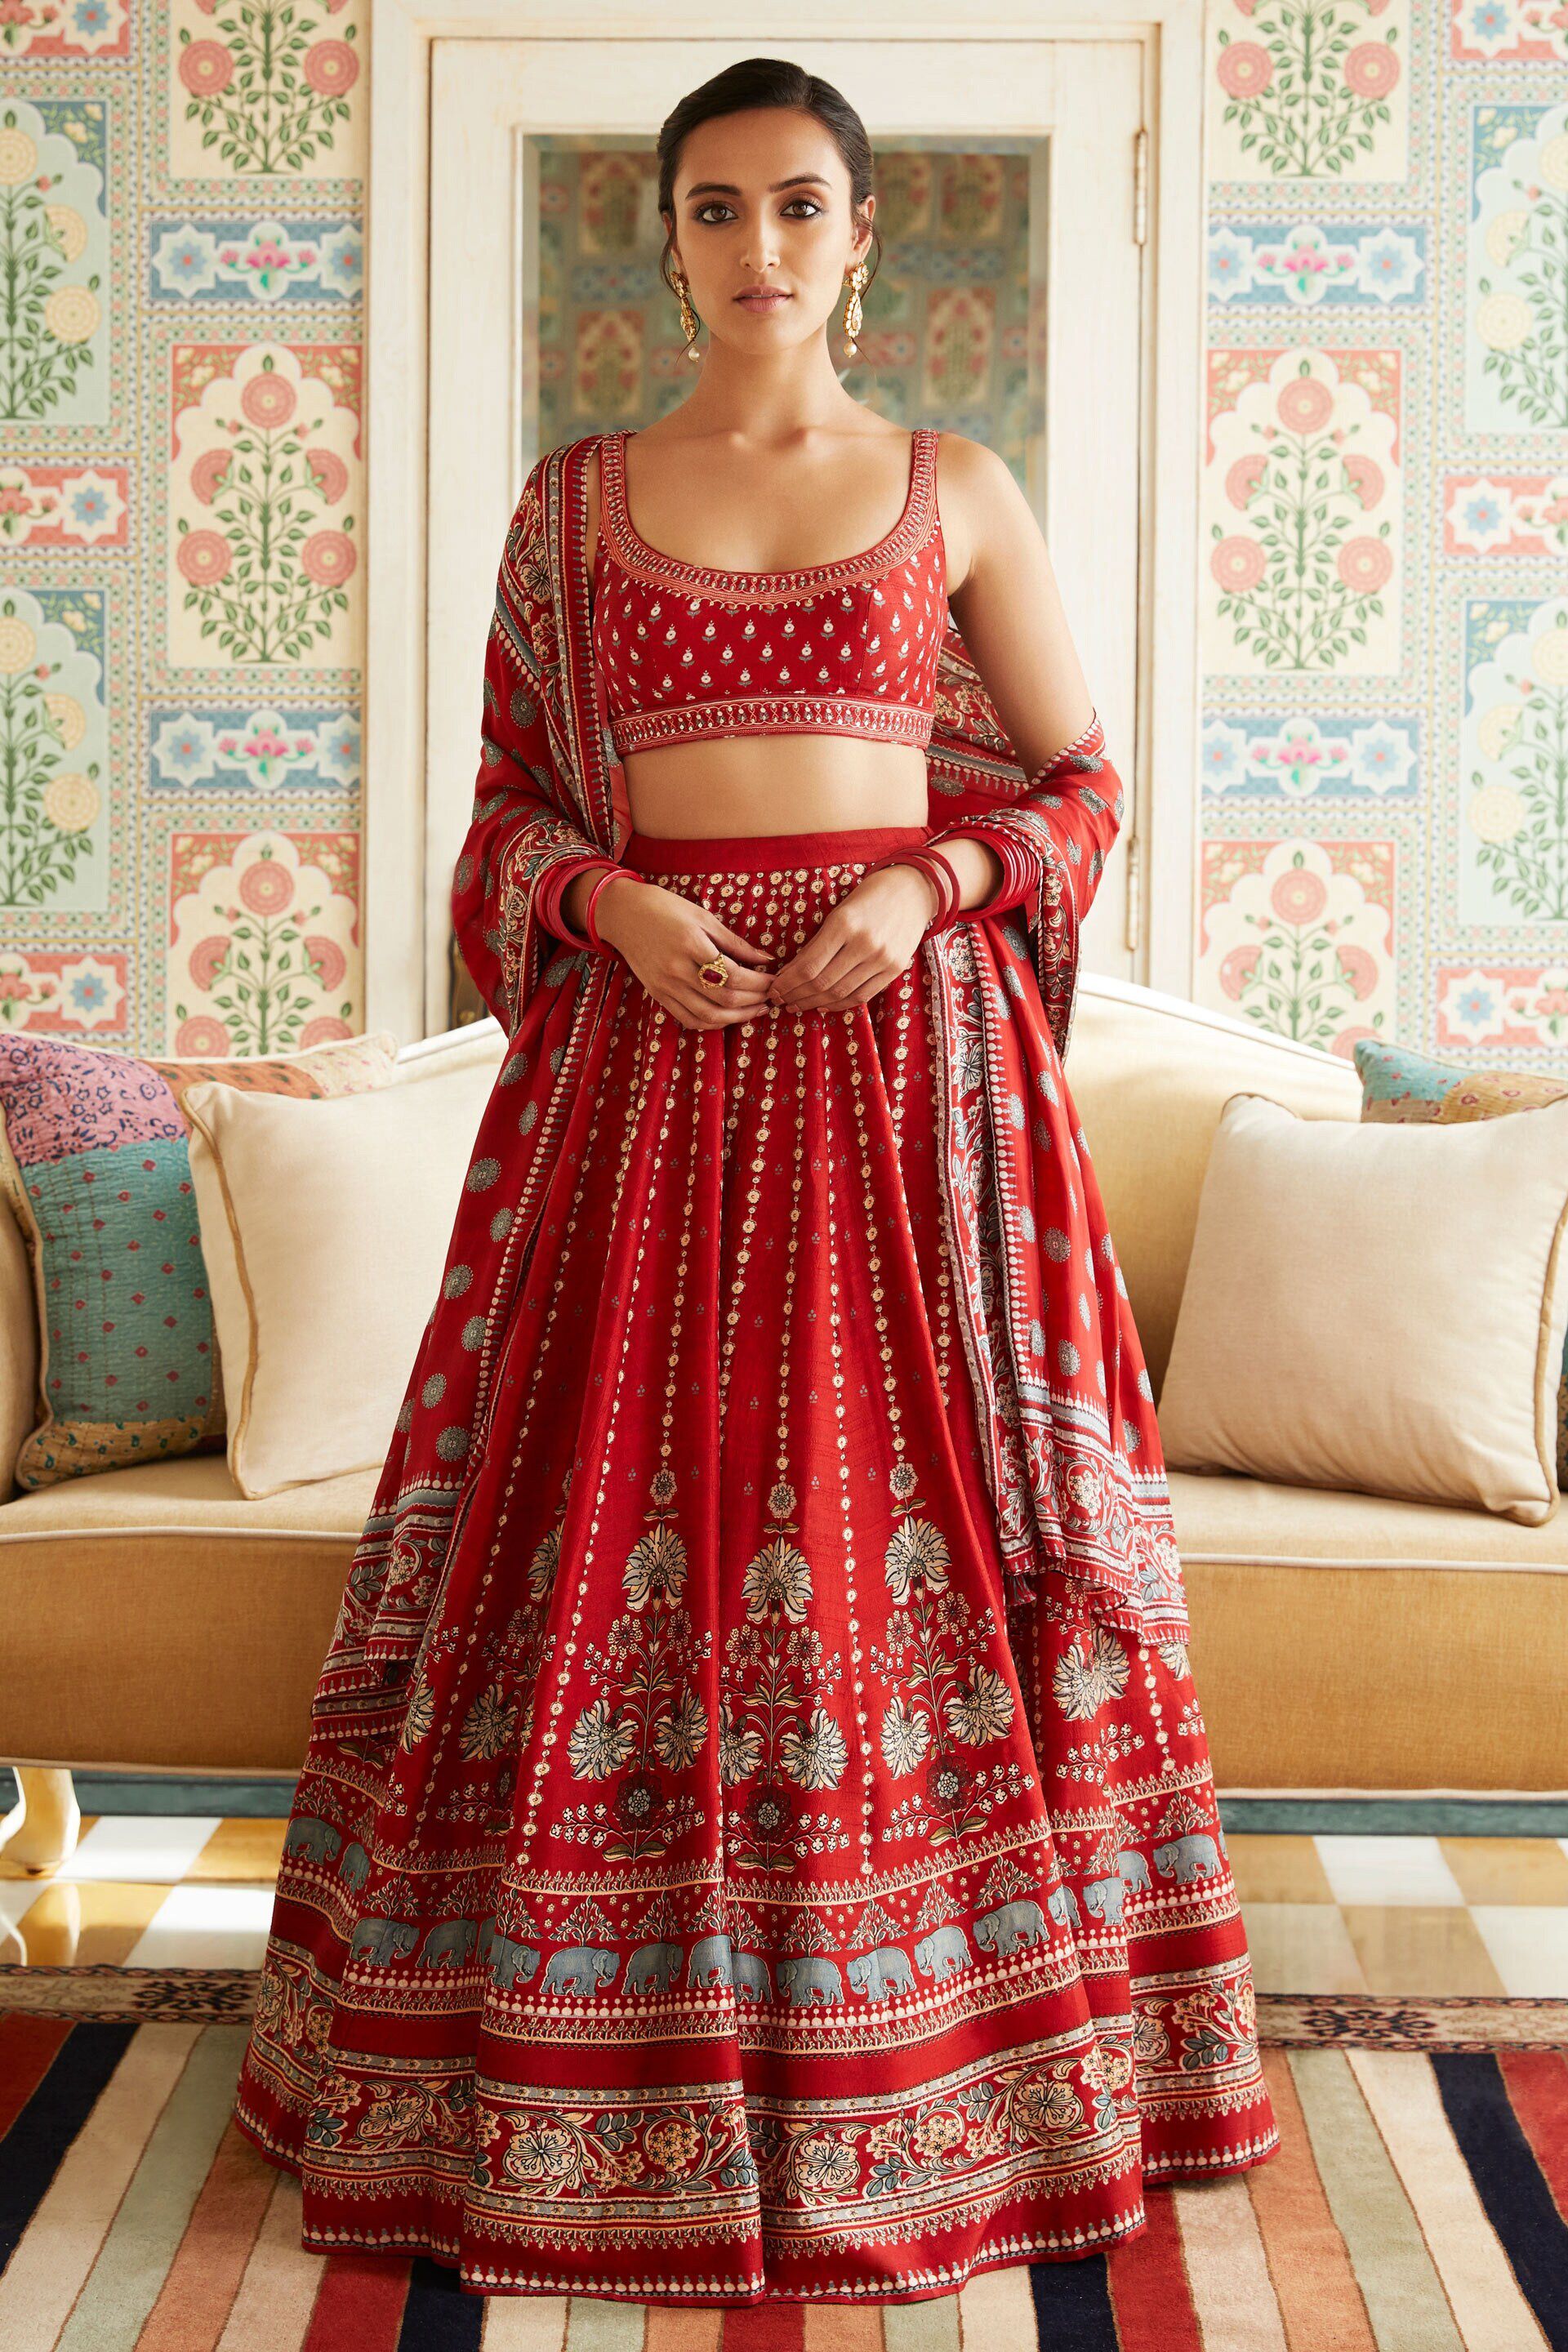 Aashni & Co launches Anita Dongre's latest collection in London, UK